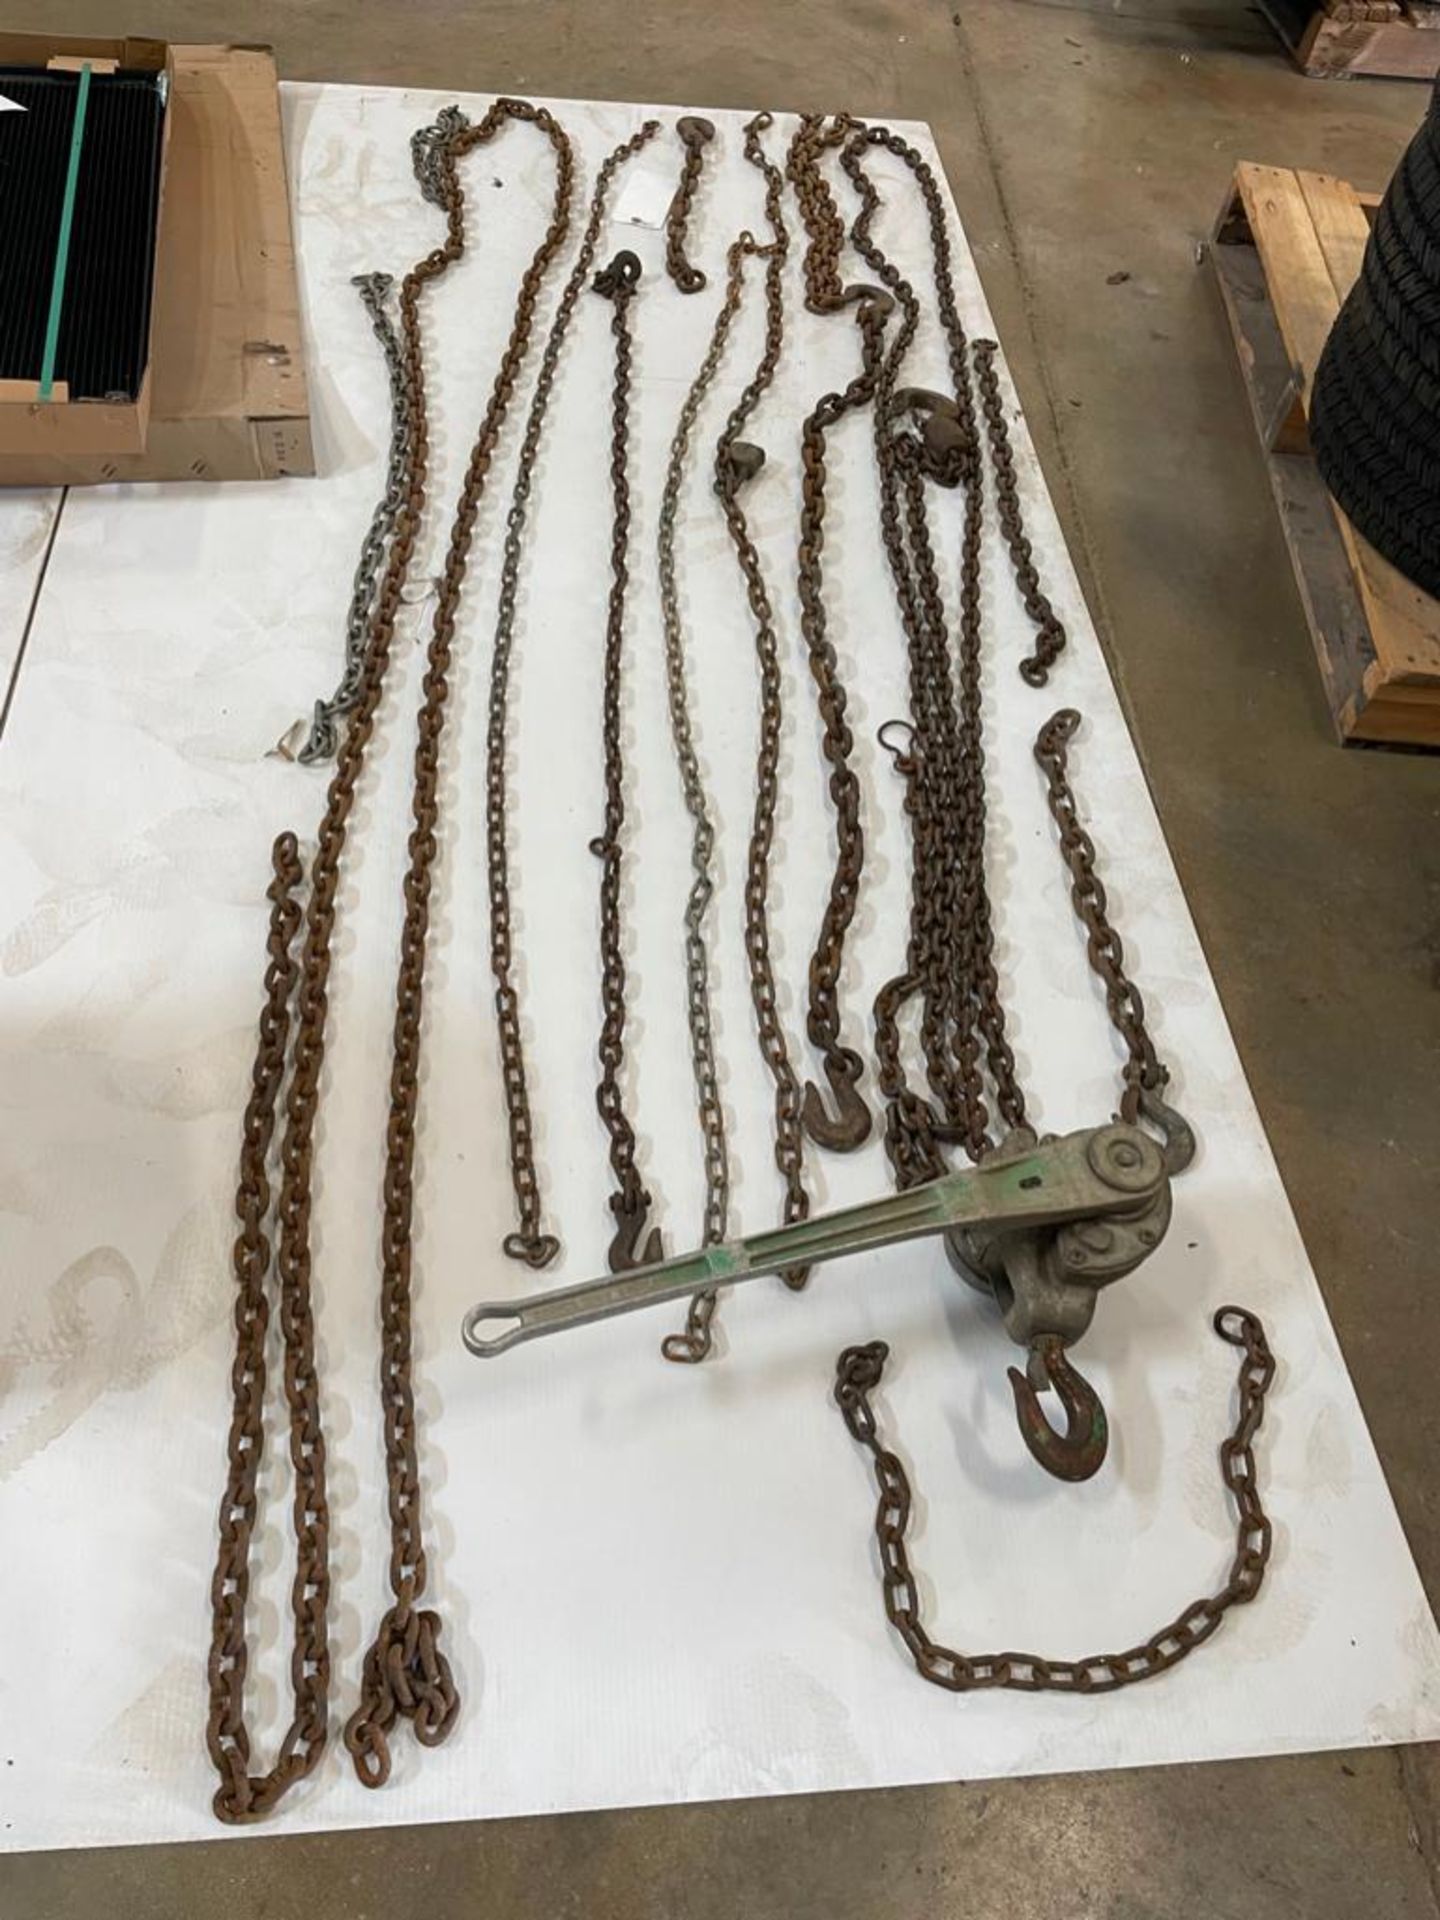 Miscellaneous Chains, Pulley, & Hooks. Located in Hazelwood, MO - Image 7 of 7